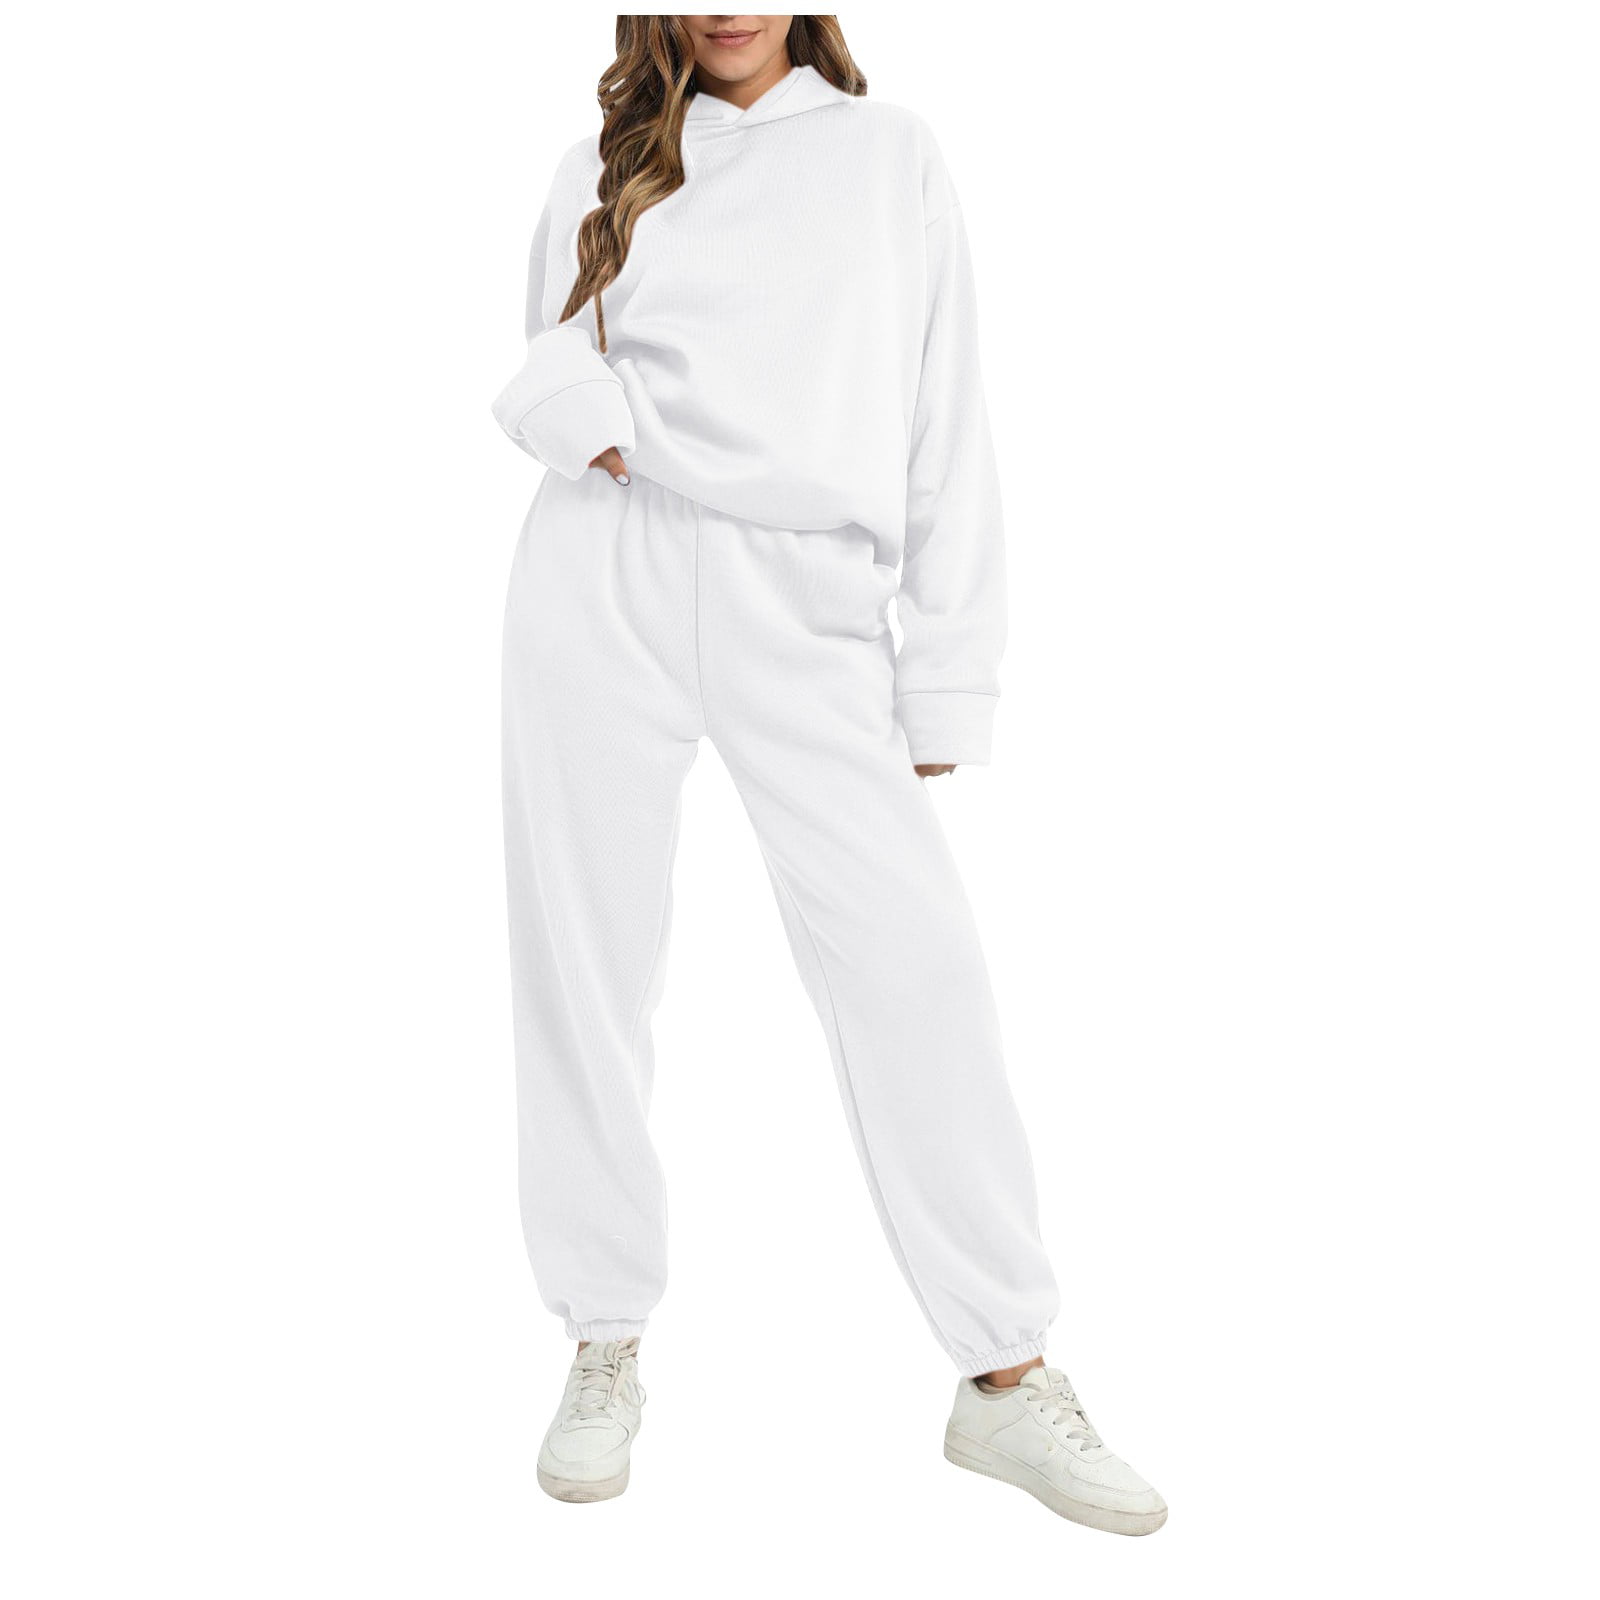  Women 2 Piece Outfits Sweatsuit Sets 2023 Fall Fashion Two  Piece Short Sweat Suit Sets Oversized Hoodie Sweatshirt Tracksuit Workout  Lounge Matching Sets Winter Clothes 1048qianhuahui-S